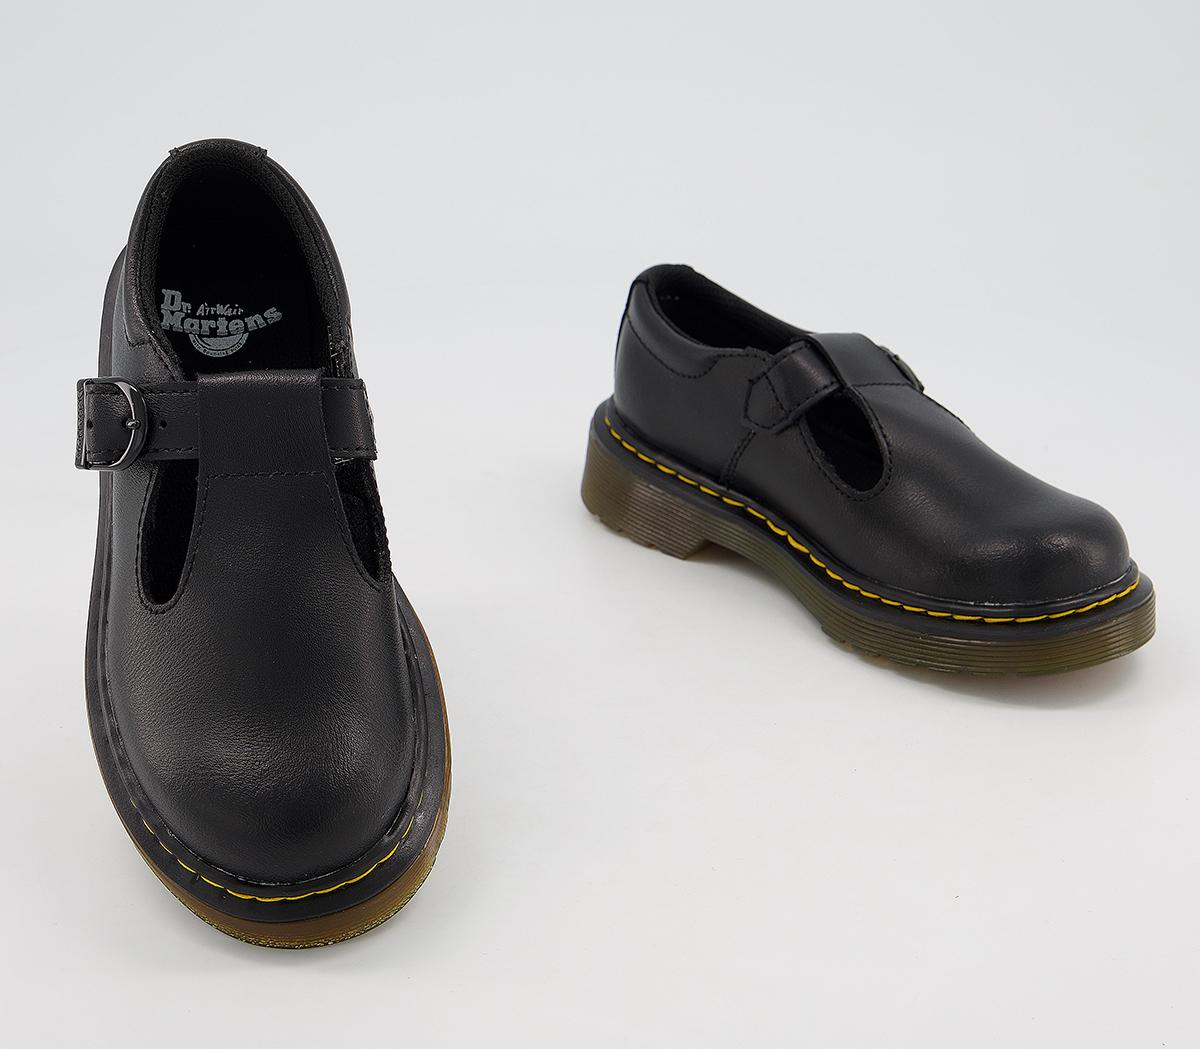 Dr. Martens Polley Mary Jane Junior Shoes Black - Unisex